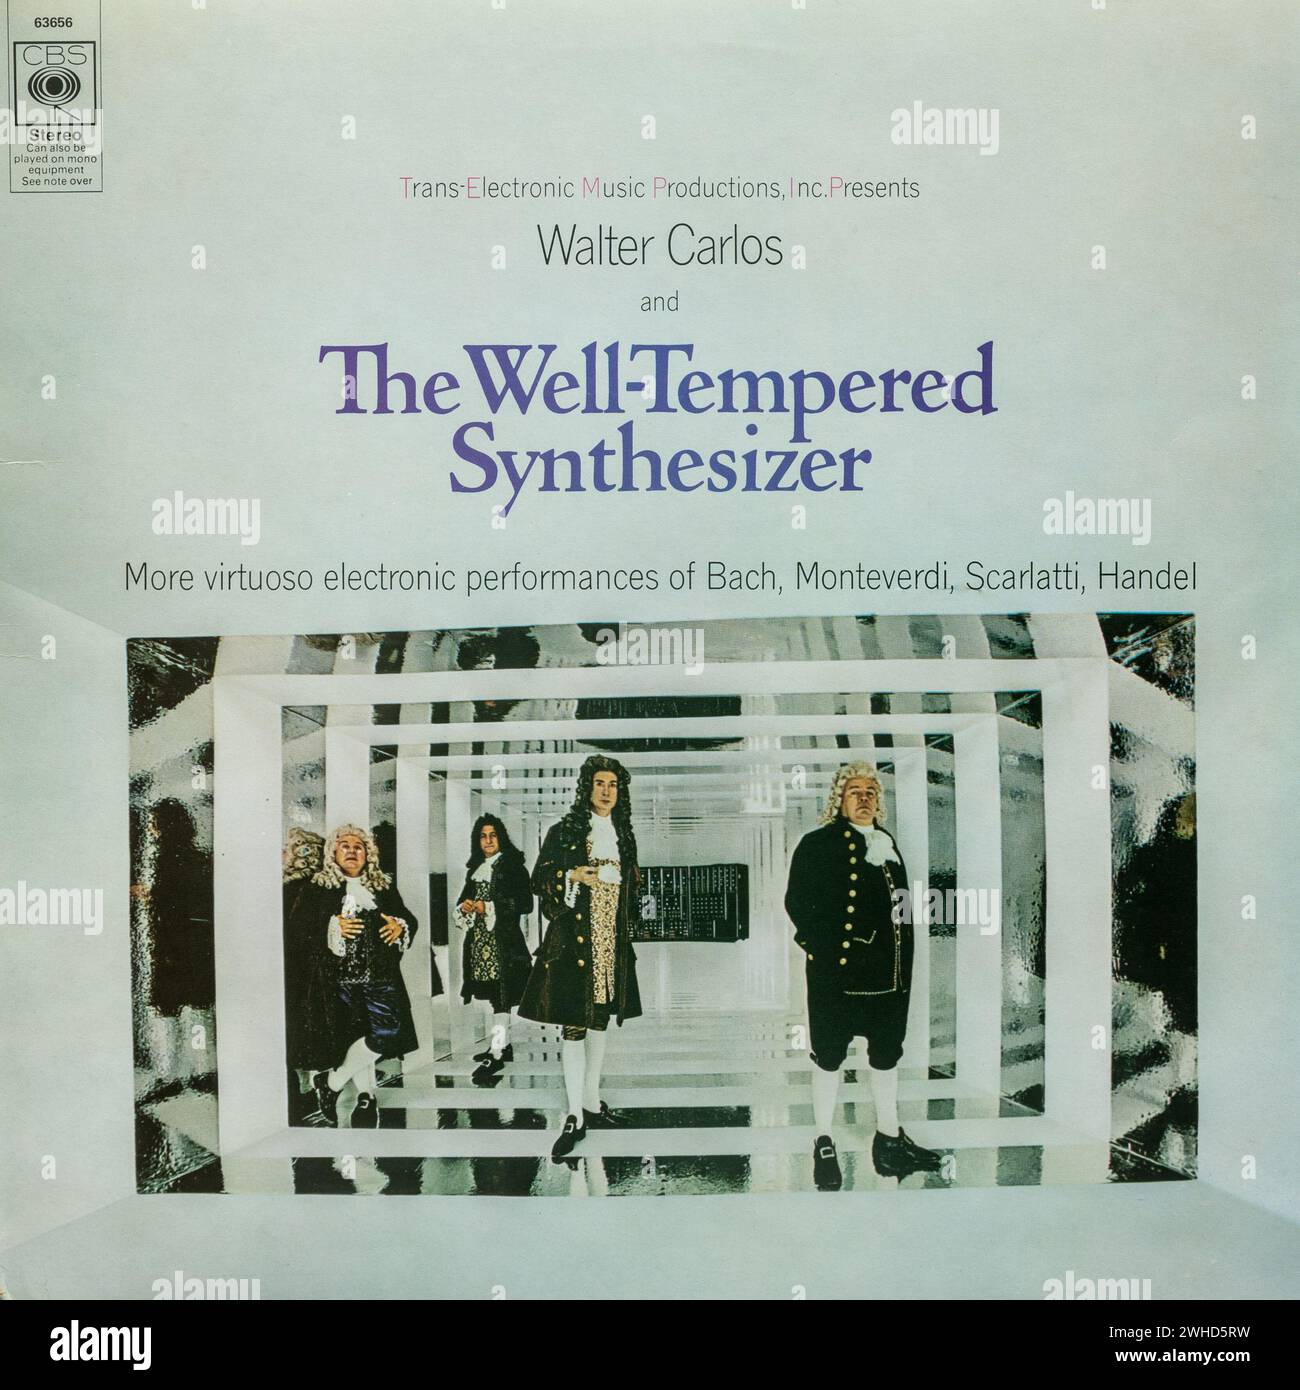 Walter Carlos and The Well-Tempered Synthesizer vinyl LP record album cover Stock Photo